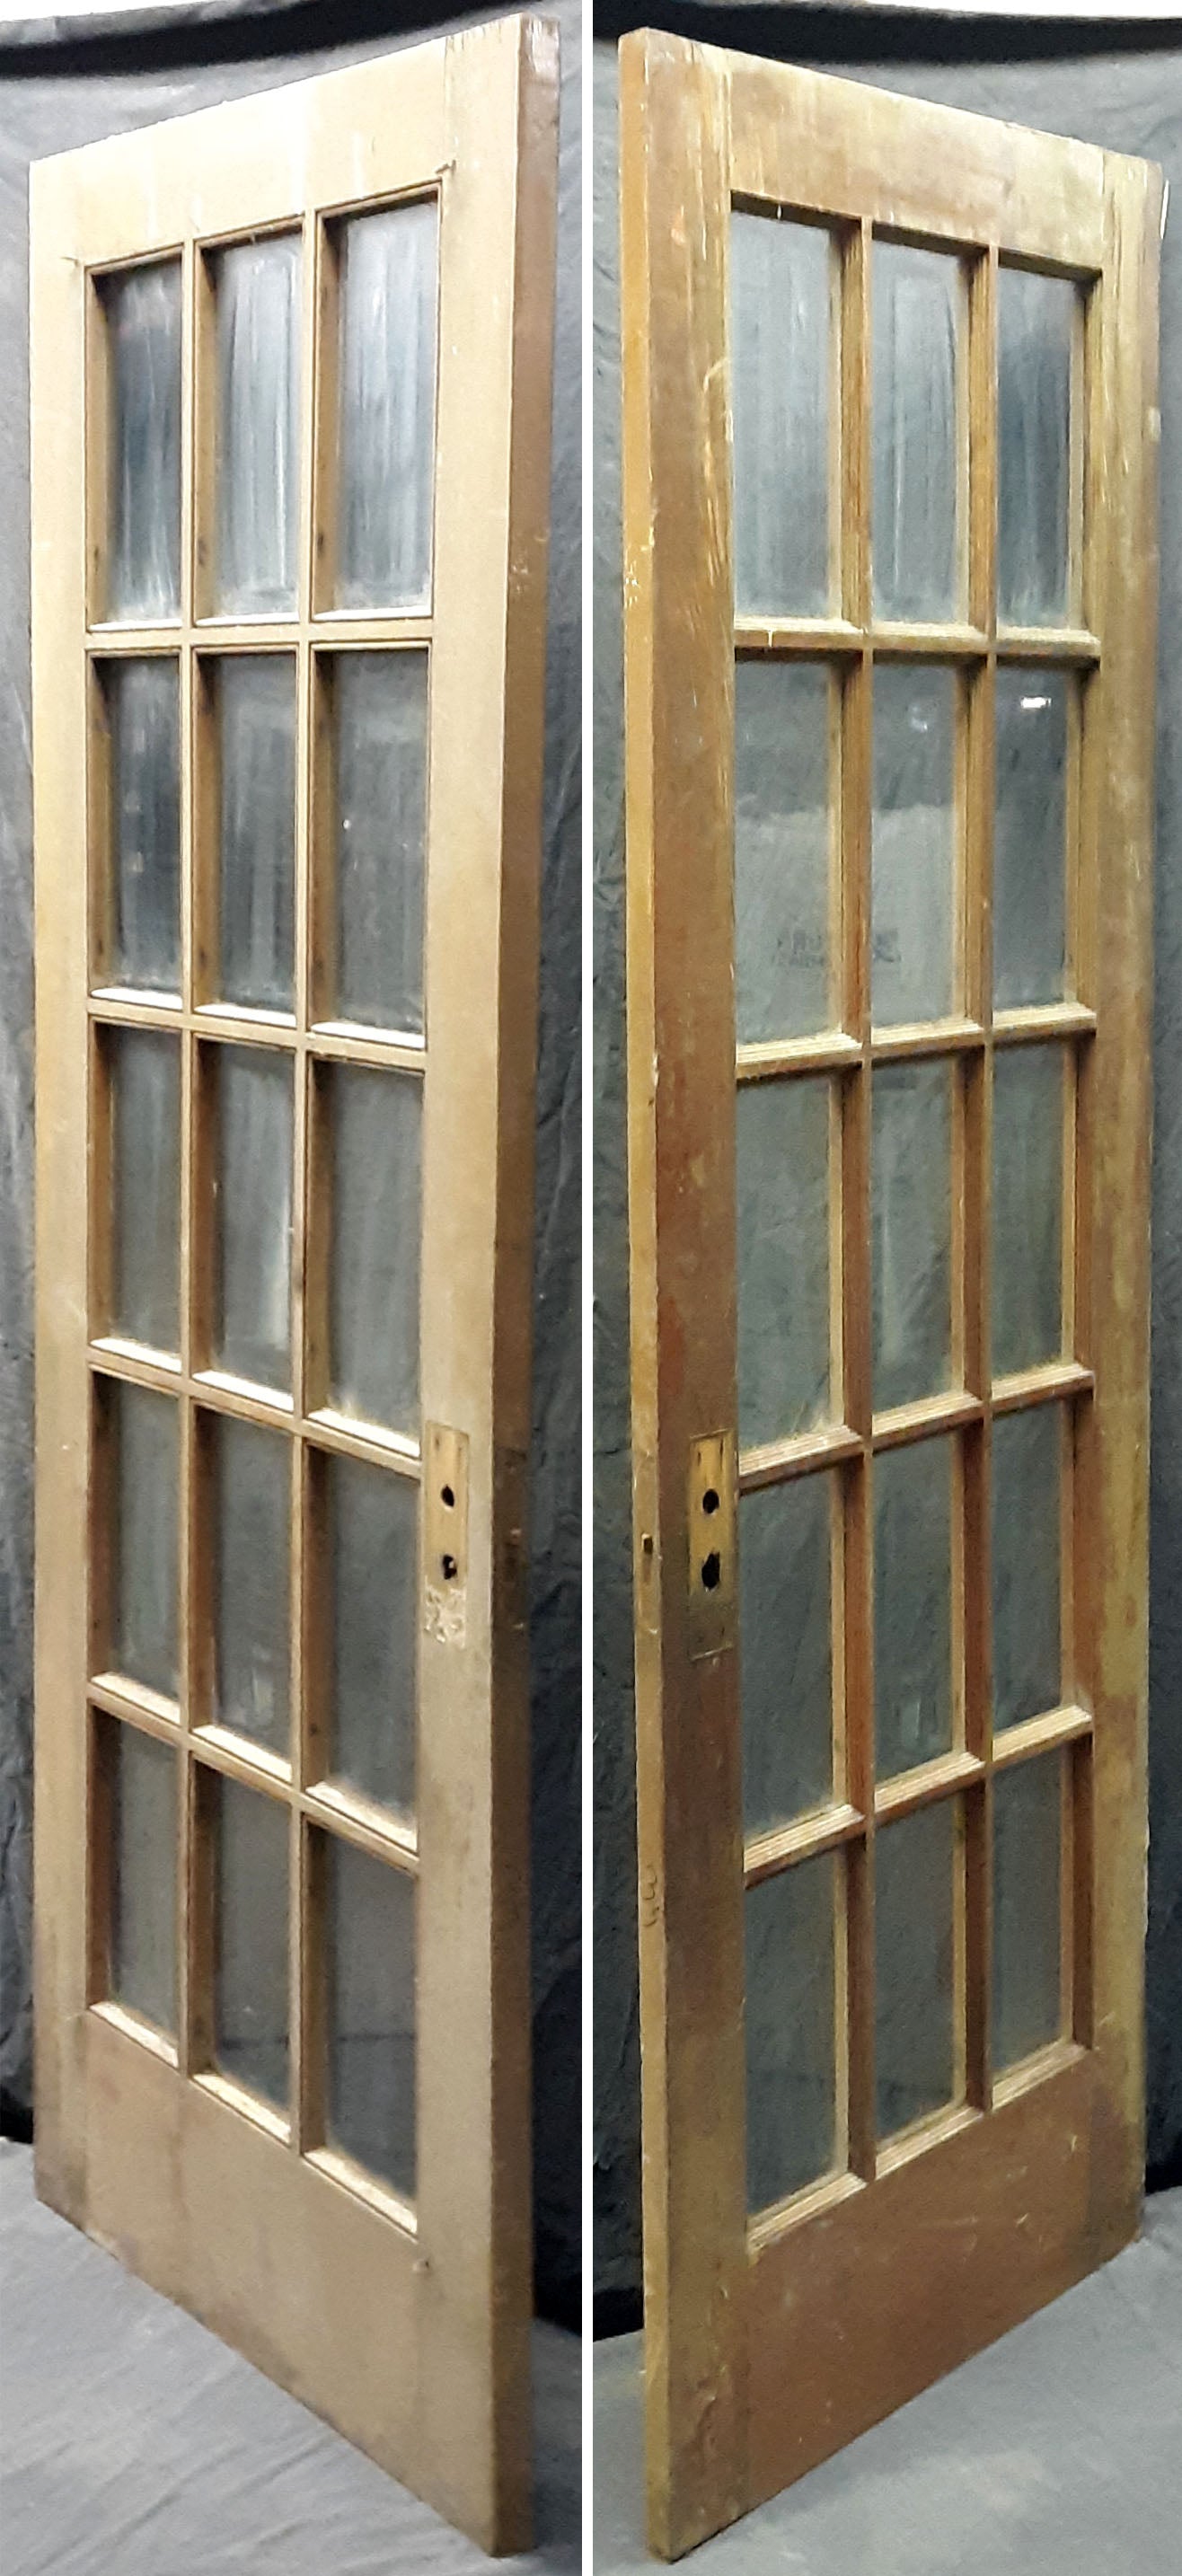 60"x78" Pair Antique Vintage Old Reclaimed Salvaged French Double Wood Interior Doors 30 Windows Glass Lites Panes